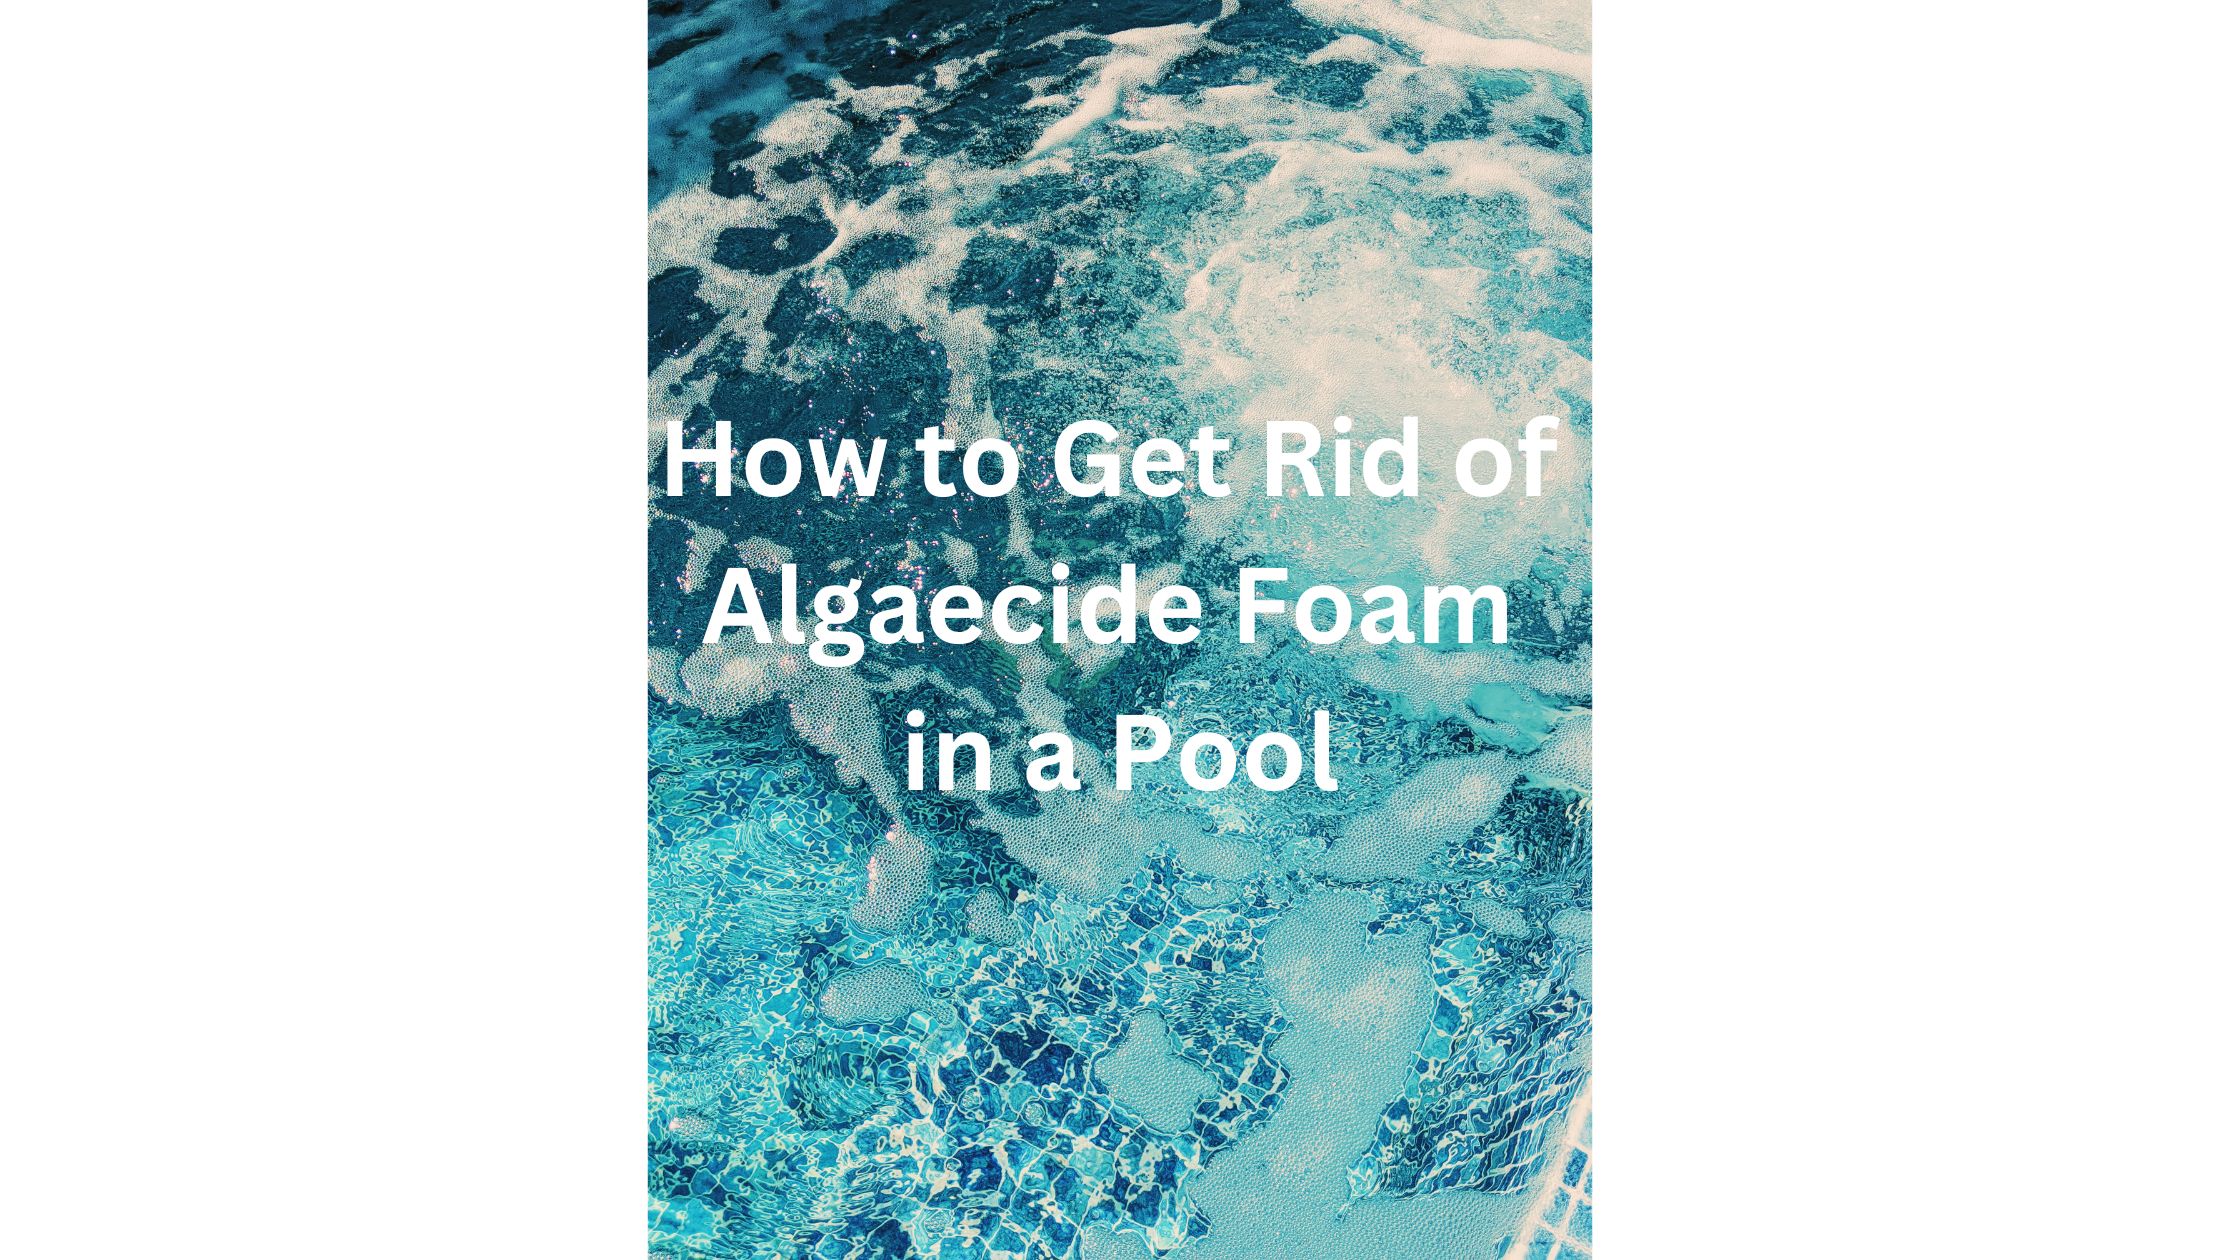 How to Get Rid of Algaecide Foam in a Pool